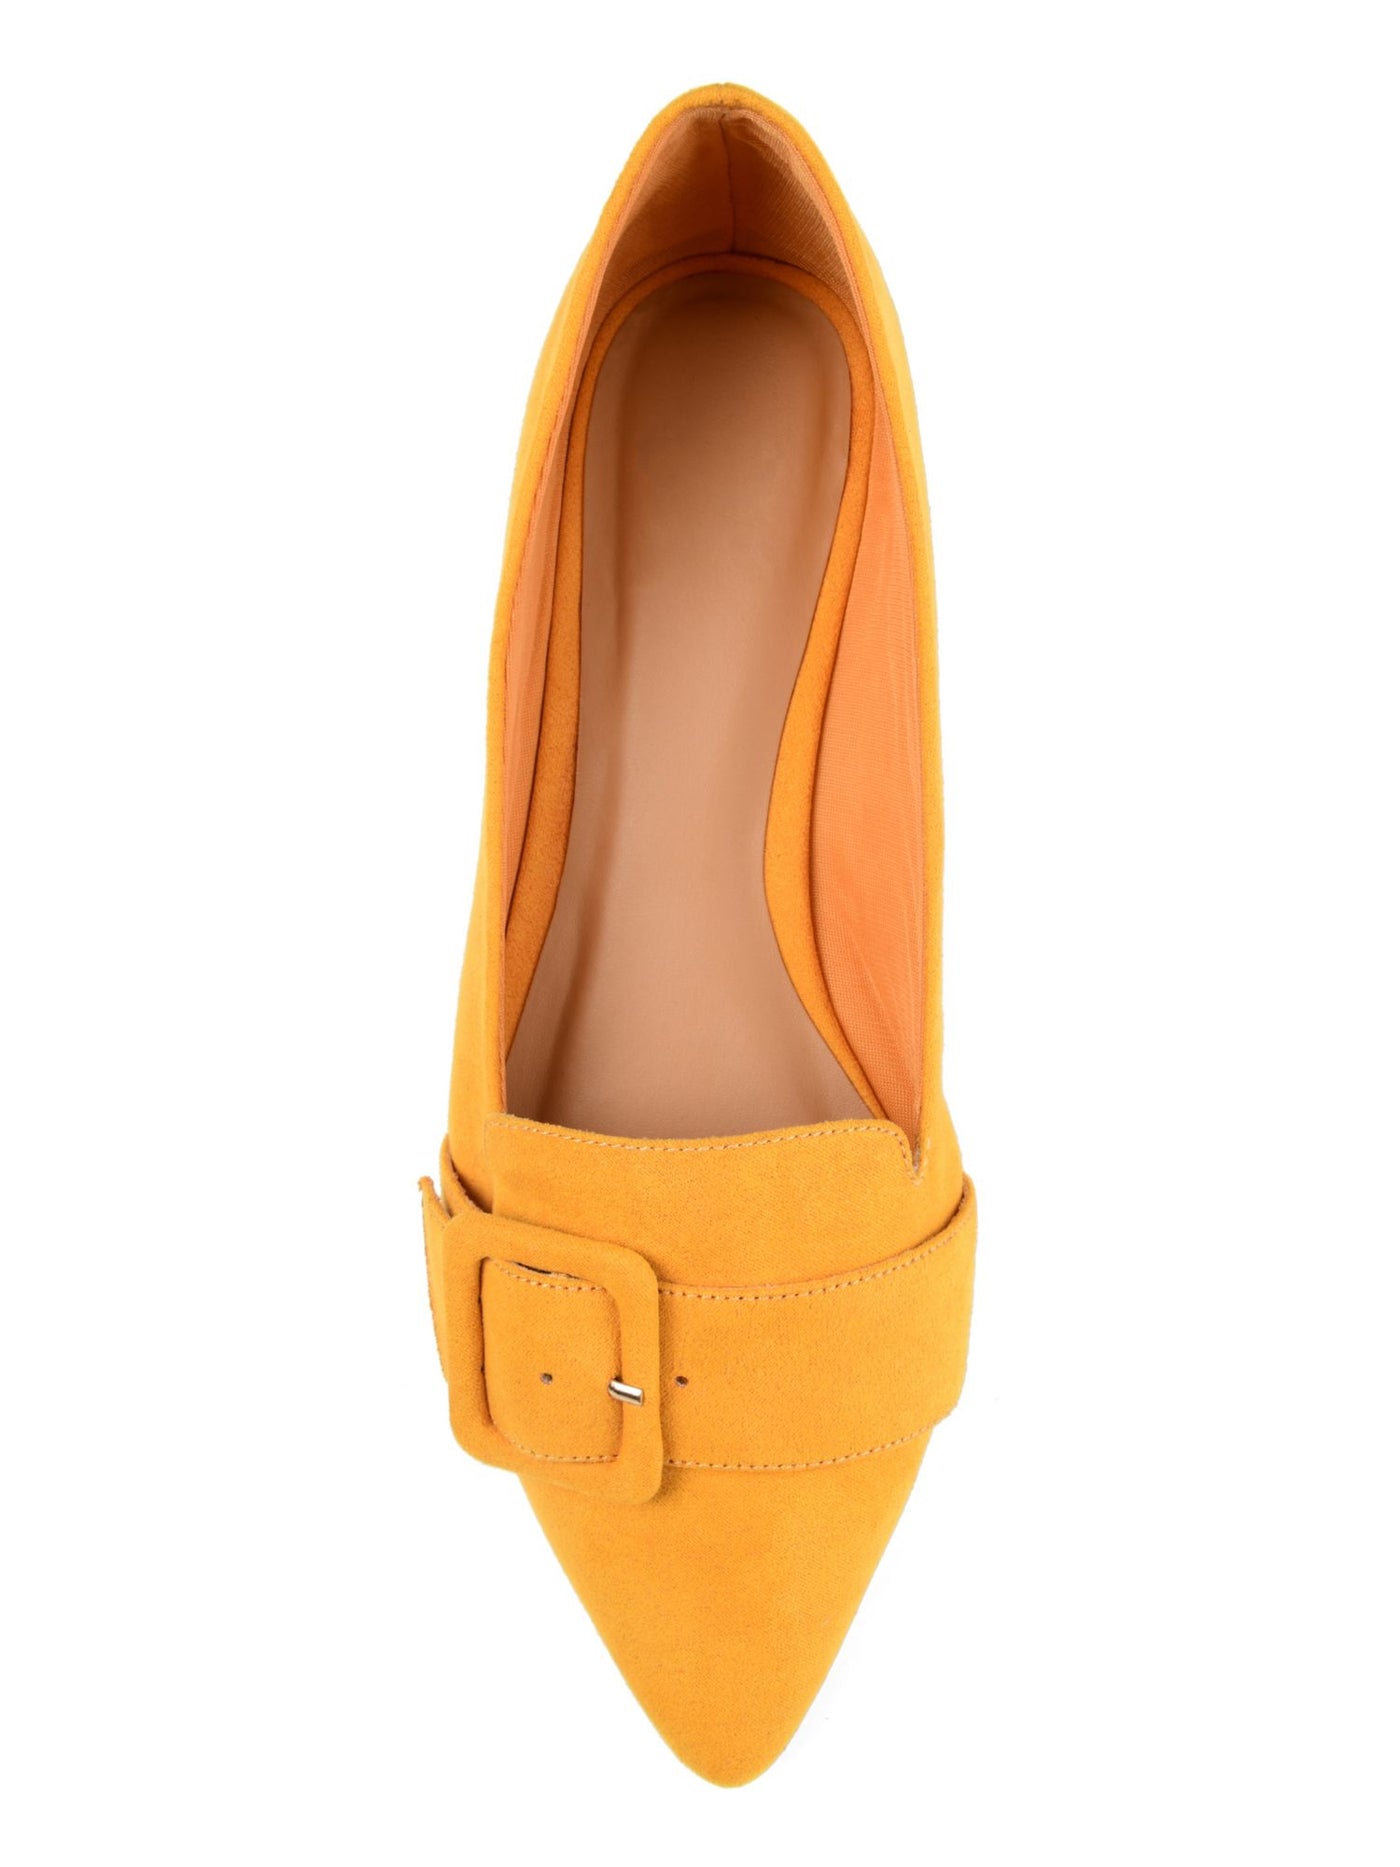 JOURNEE COLLECTION Womens Yellow Buckle Accent Cushioned Audrey Pointed Toe Slip On Loafers Shoes 9 M